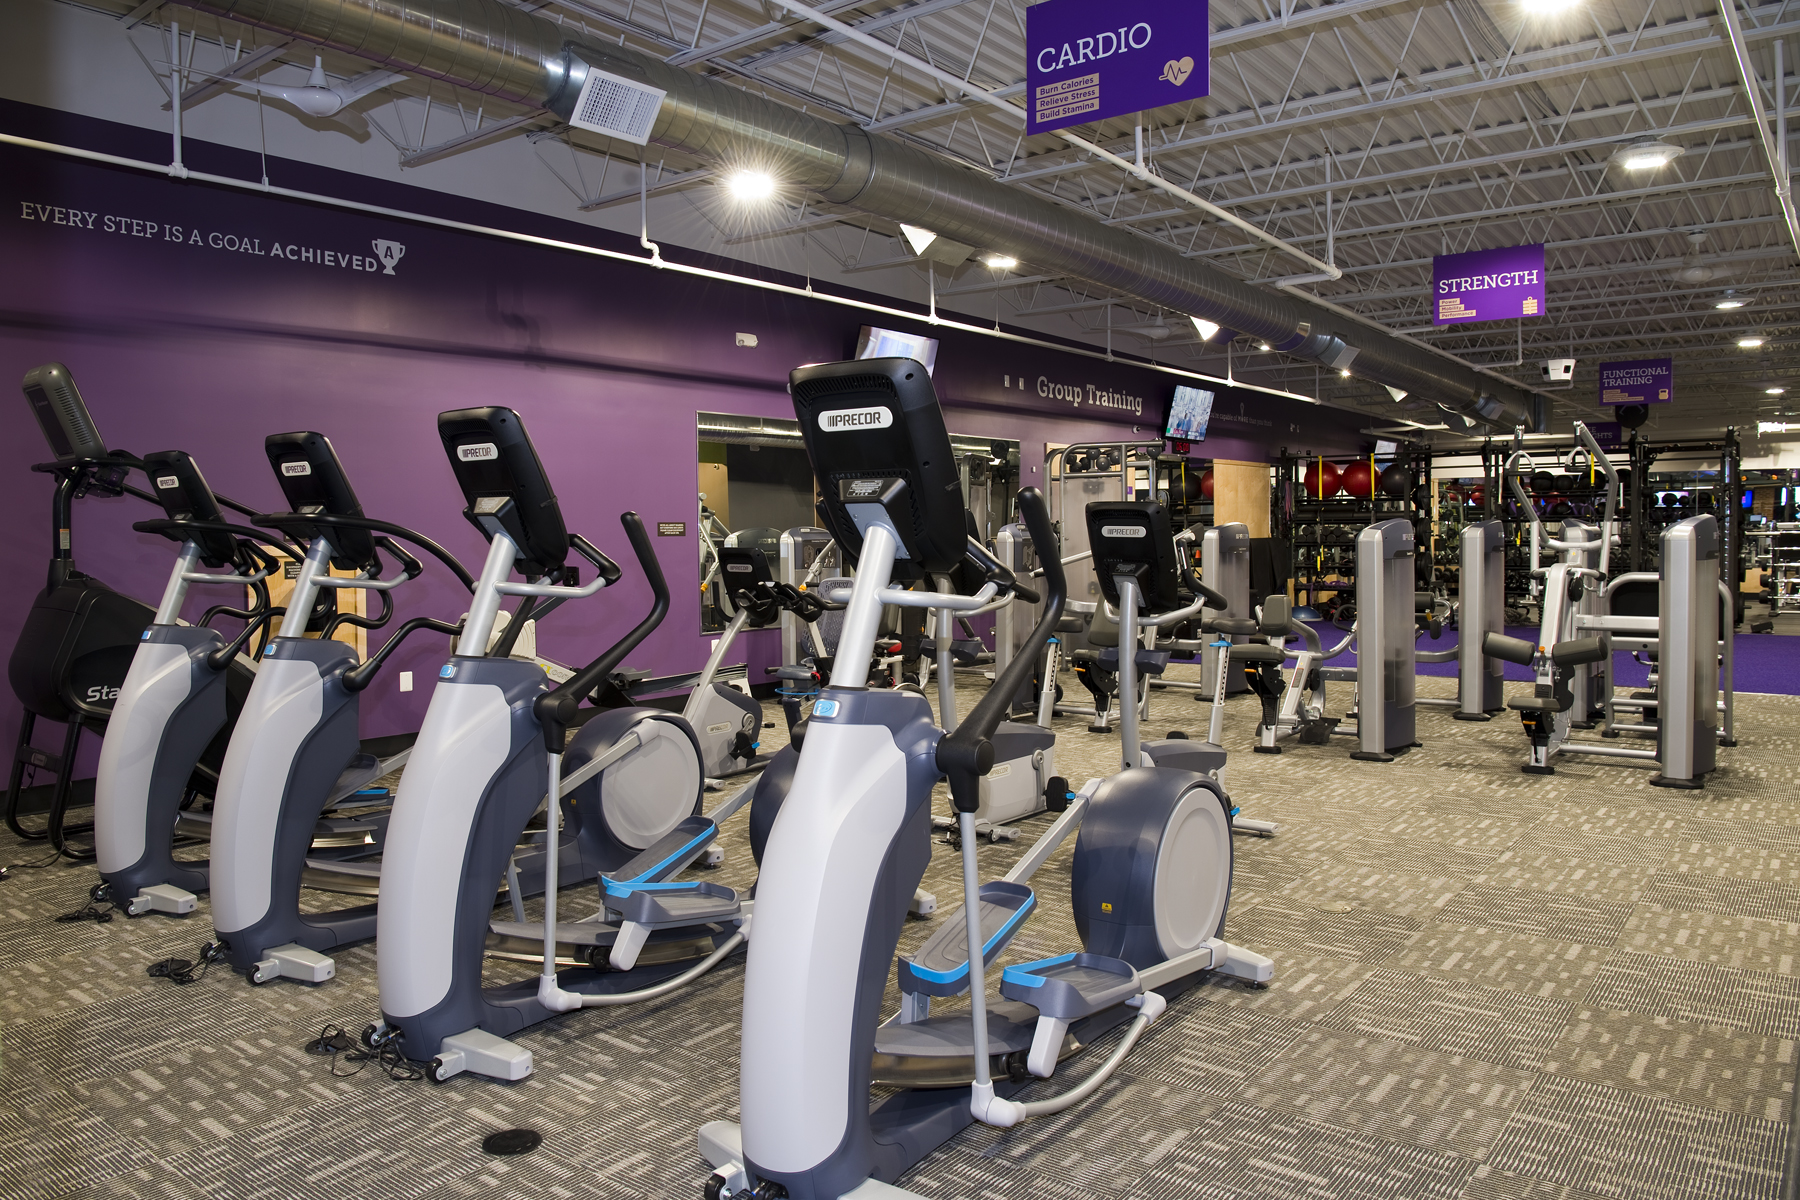 get_the_best_Anytime Fitness_ad